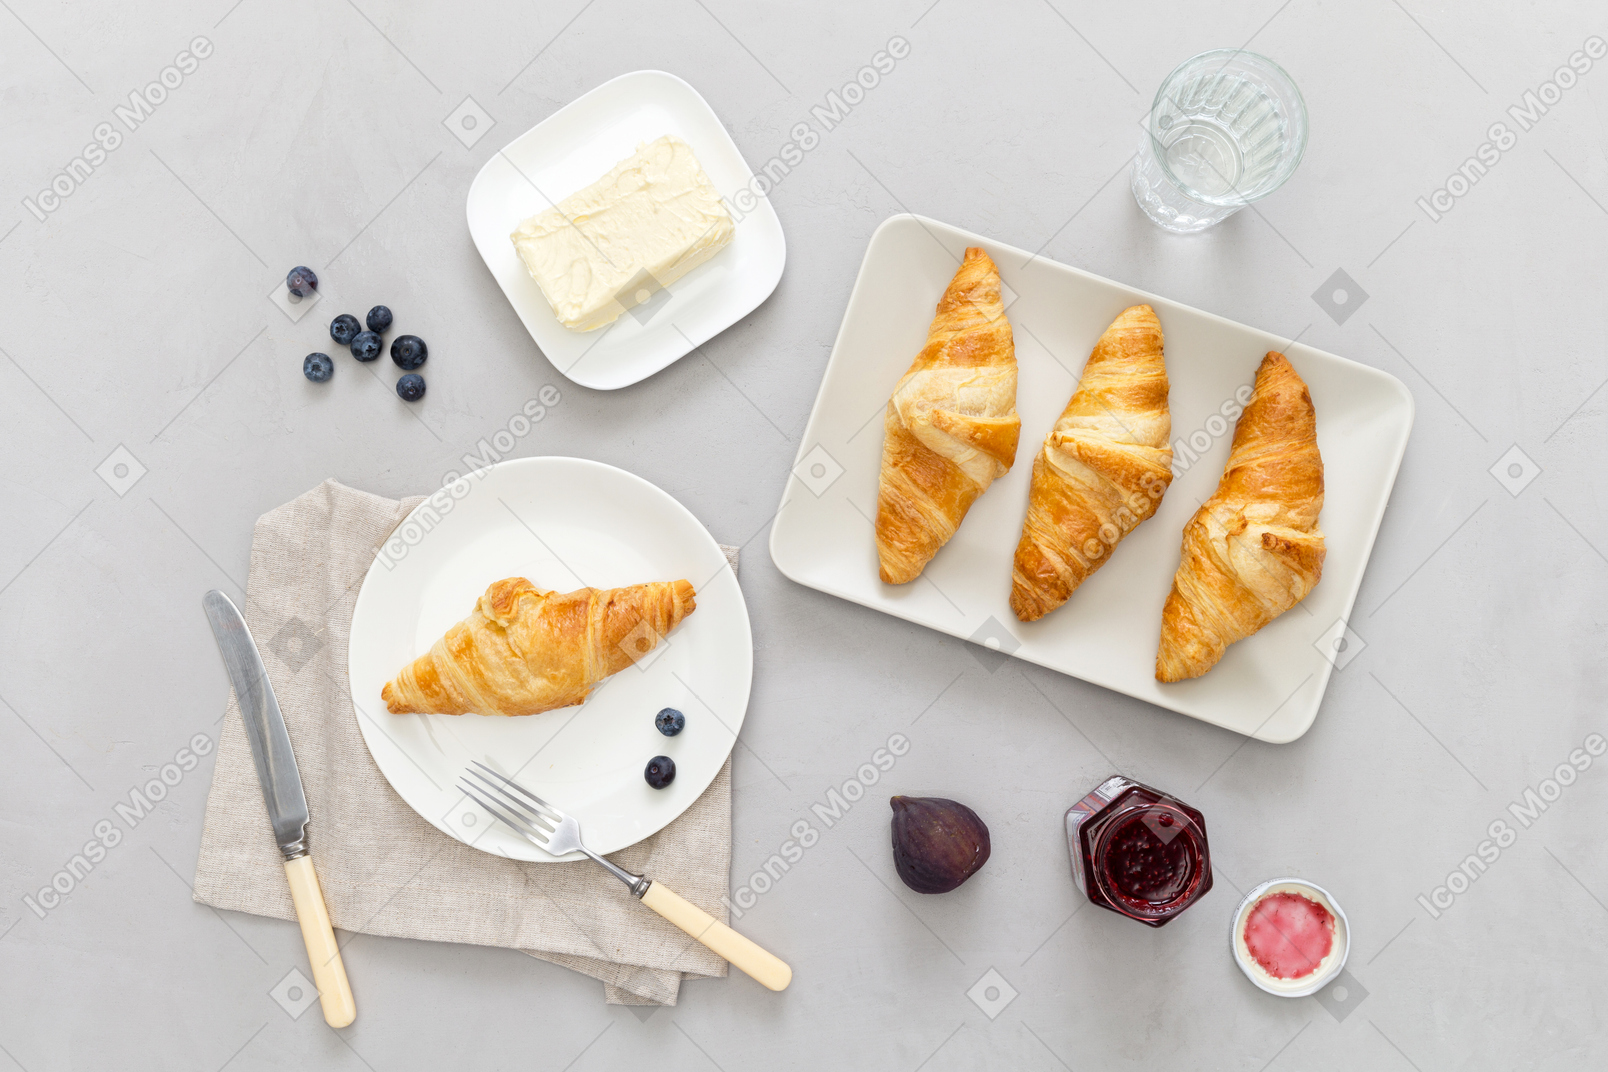 Some croissants, butter and jam